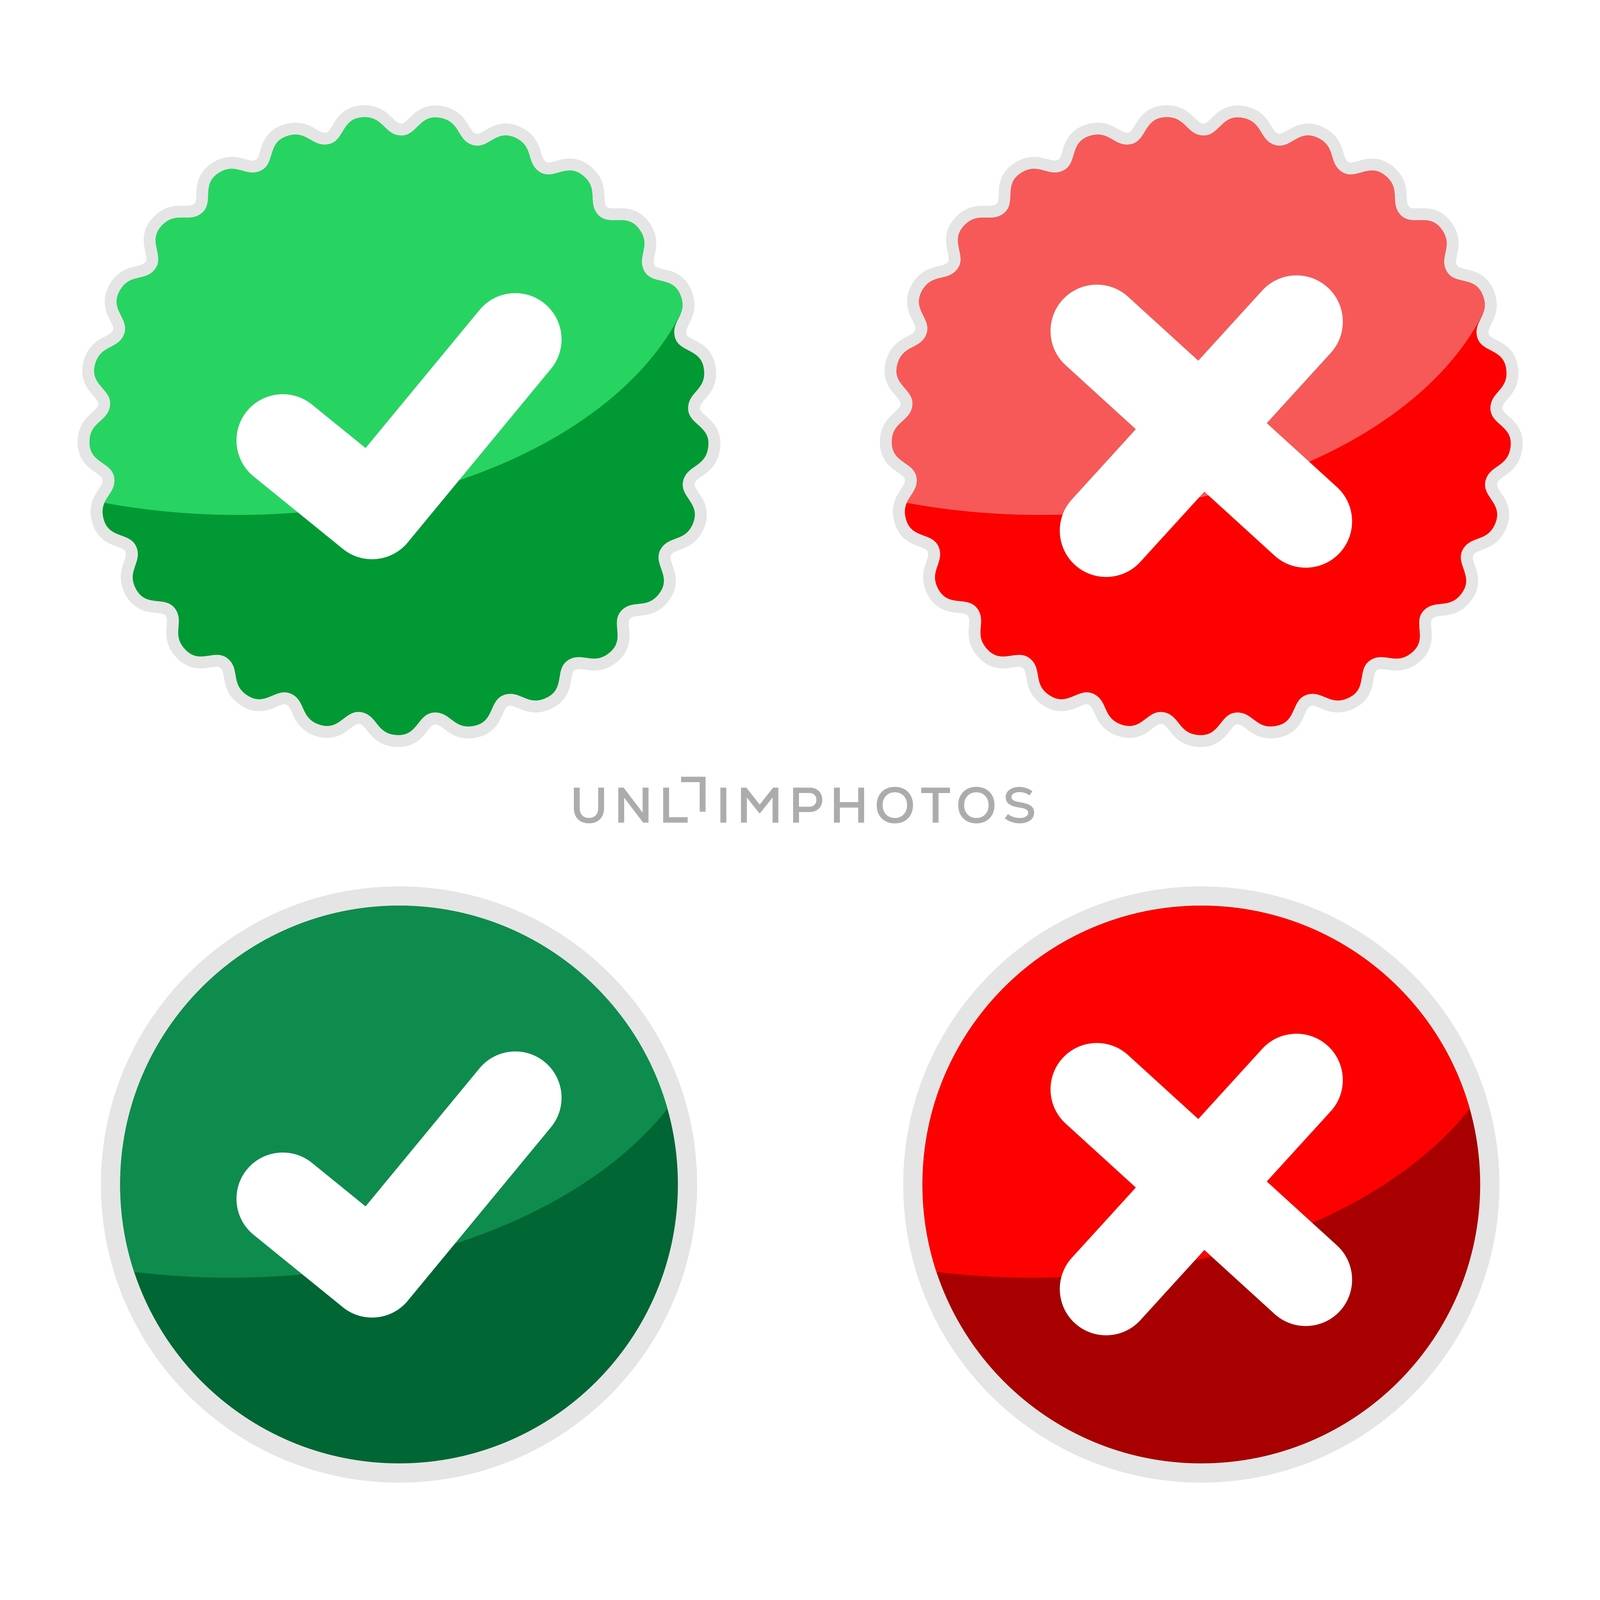 Check Mark and Cross, True and Wrong, Approved and Denial Illustration Design. Vector EPS 10.